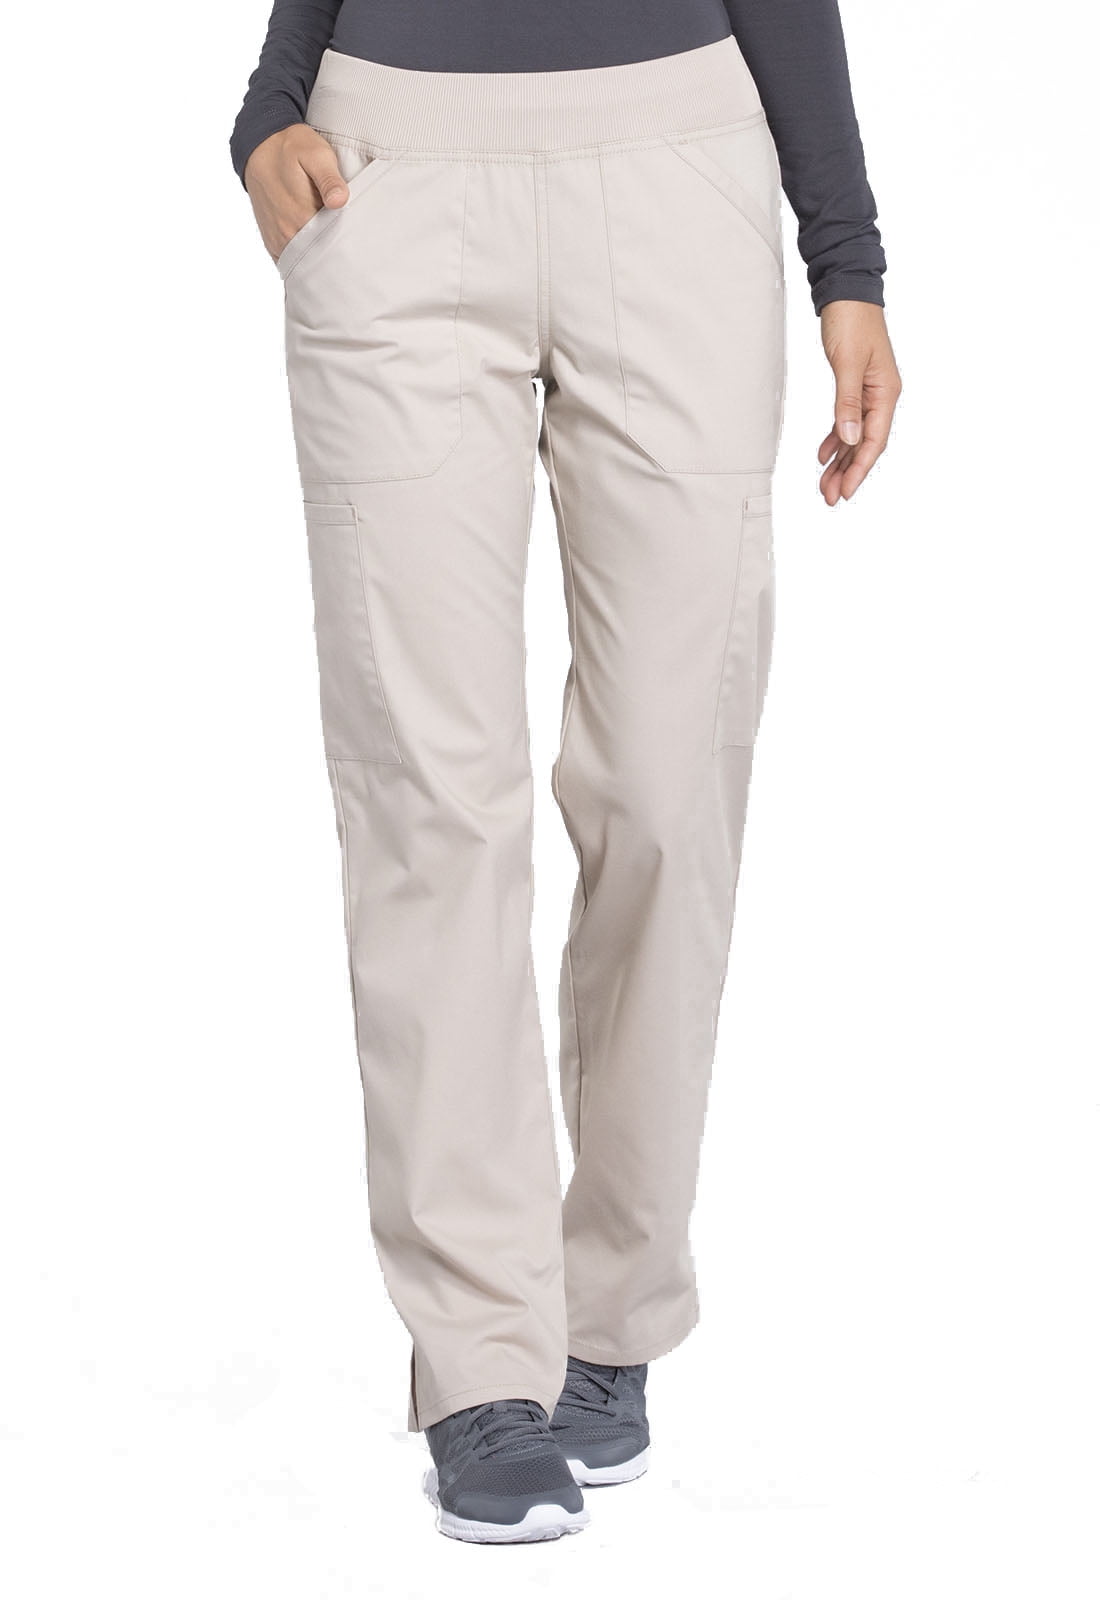 Cherokee Workwear Professionals Women's Scrubs Pant Mid Rise Straight ...